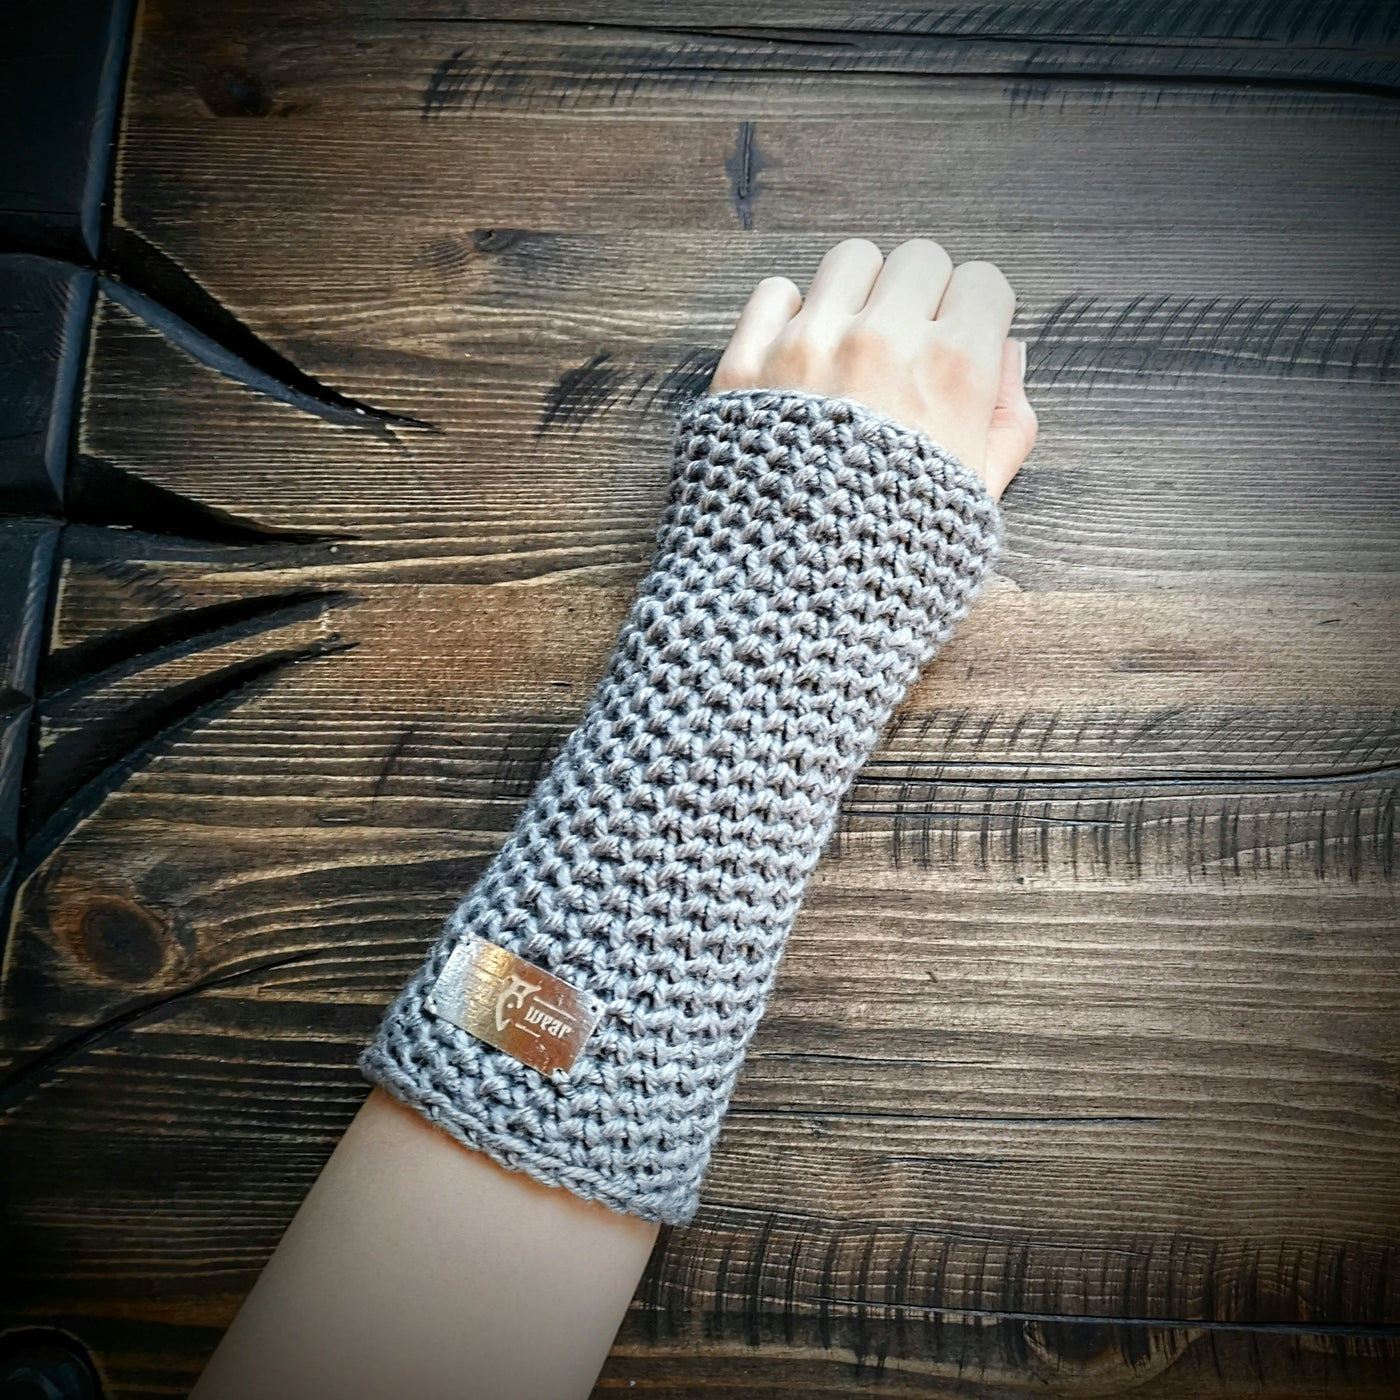 Handmade knitted silver grey arm warmers